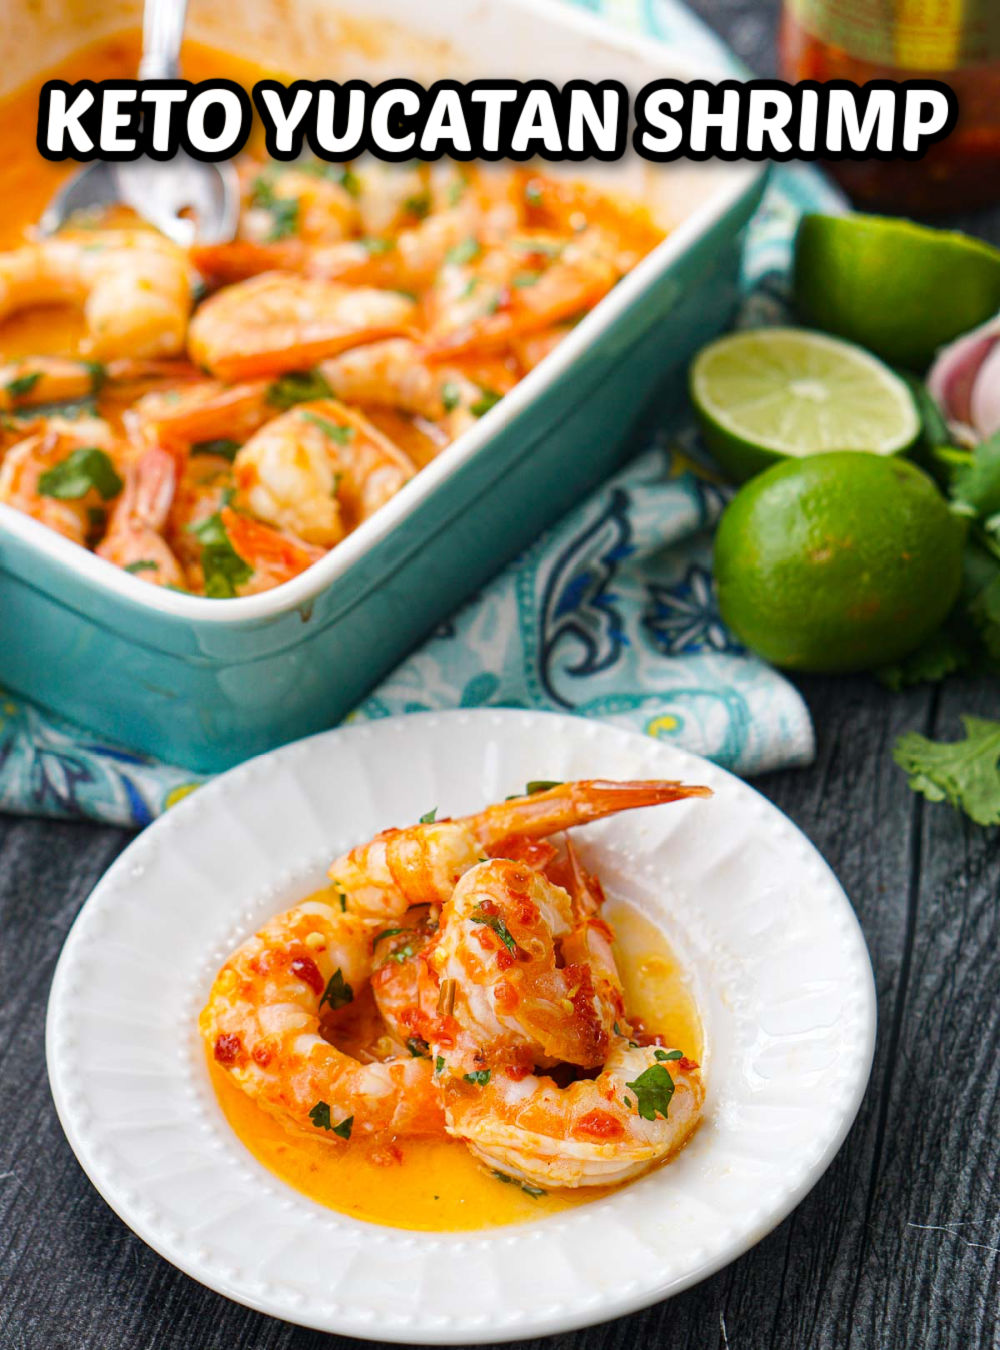  blue baking dish and white plate with keto Yucatan shrimp with fresh limes and cilantro and text